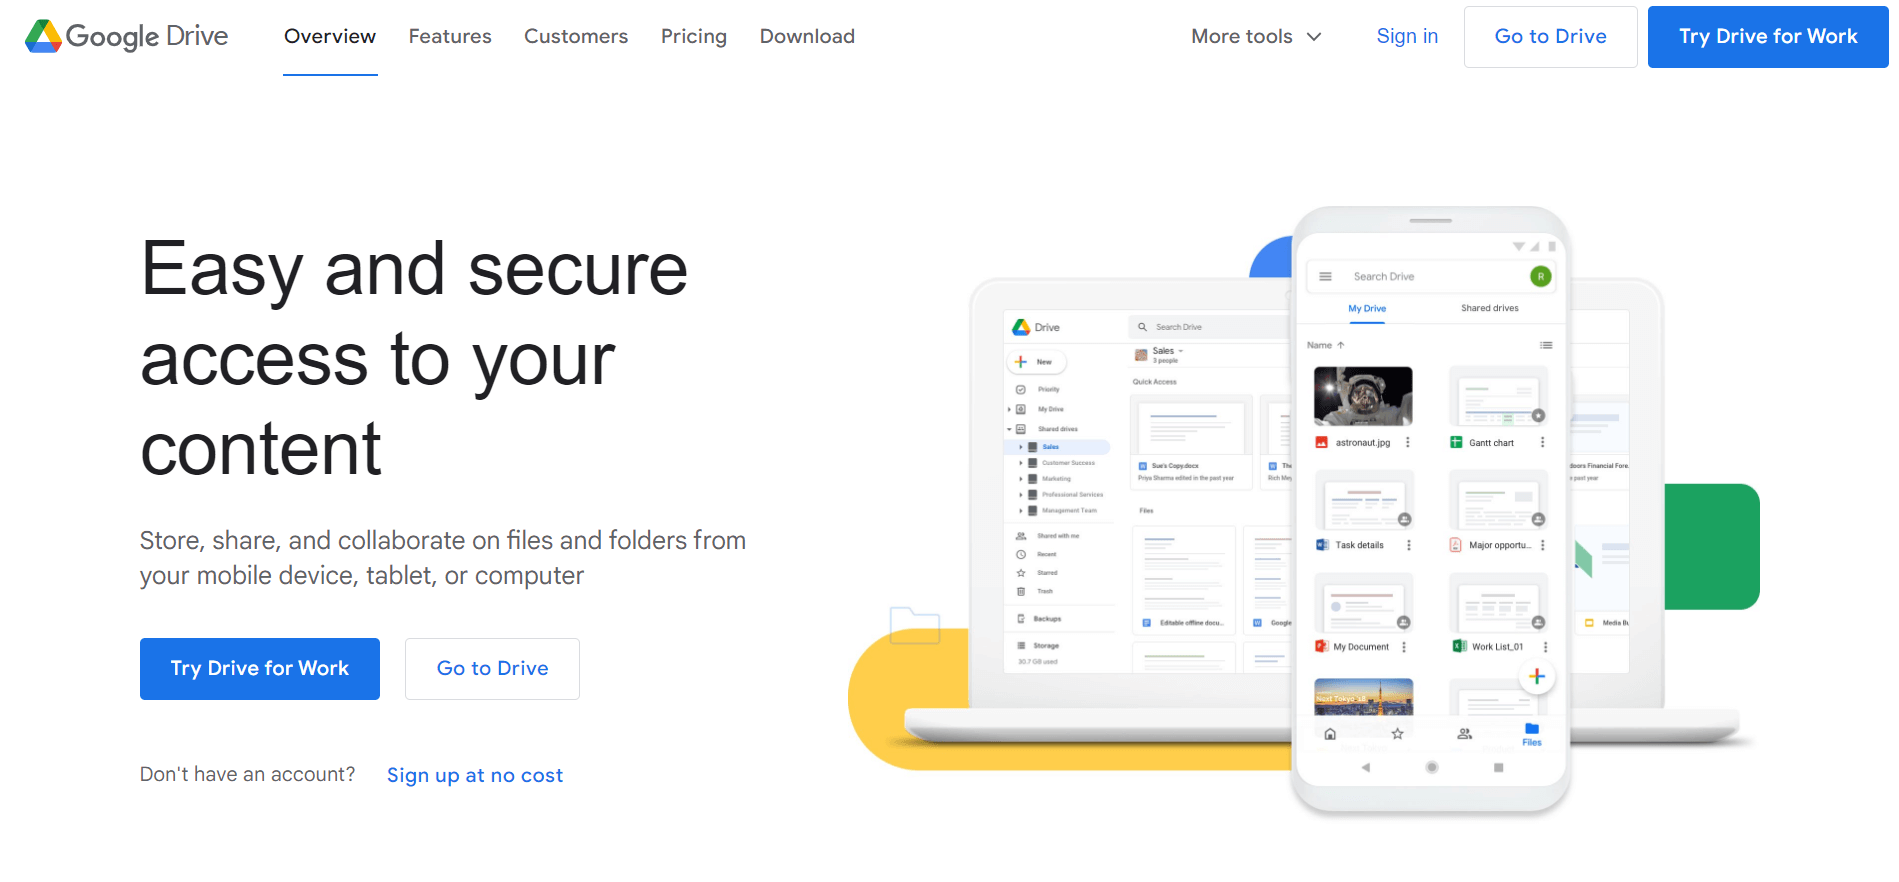 GoogleDrive homepage showing document storing on a laptop and mobile screen, with the motto "Easy and secure access to your content".